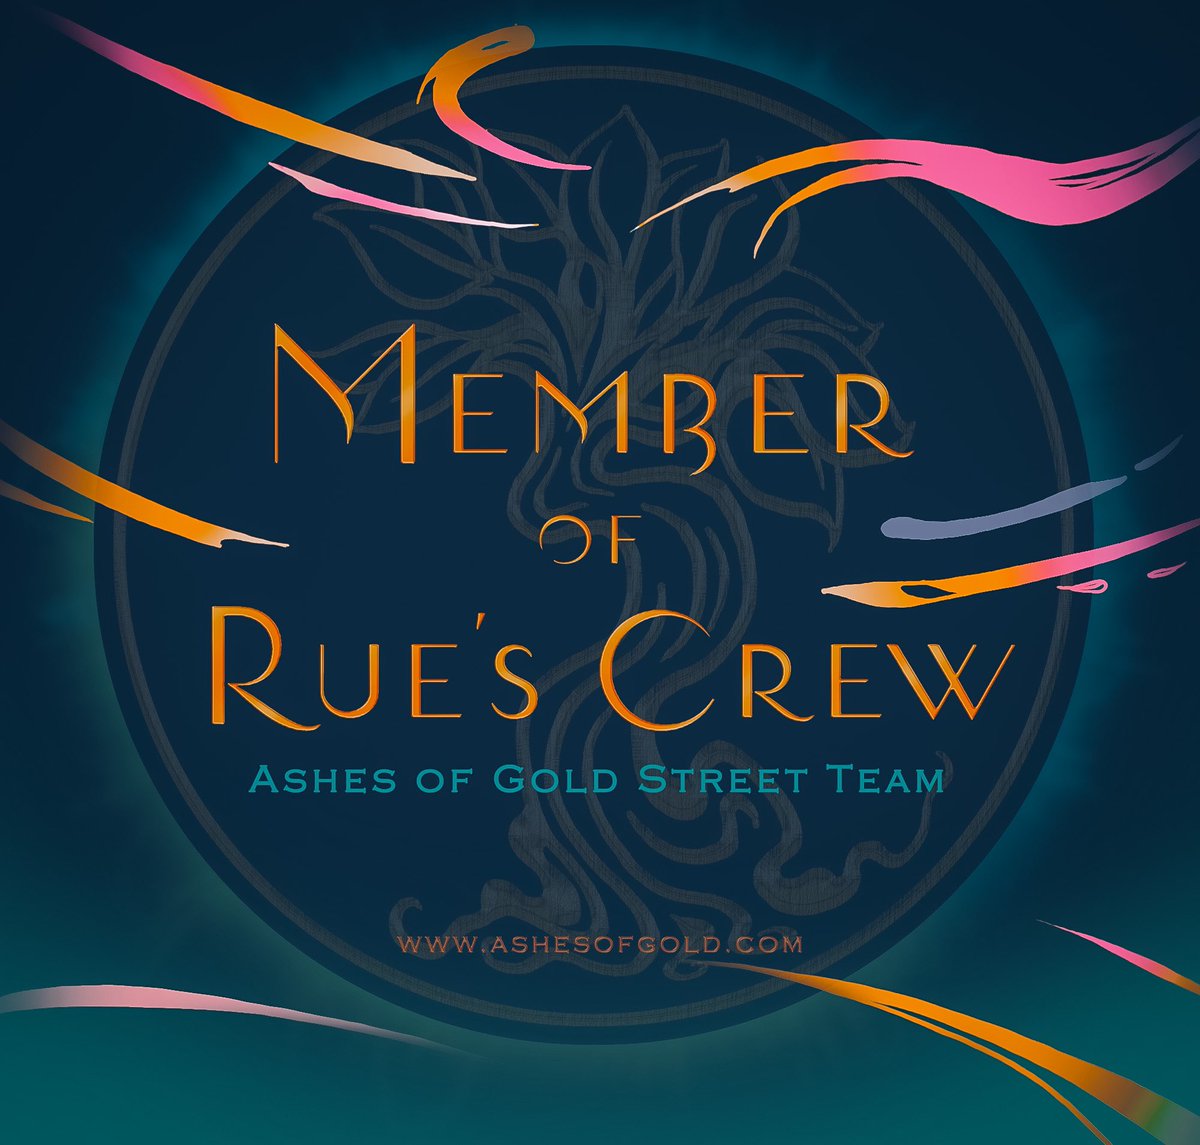 So excited to be a part of the street team for #AshesofGold! I loved Wings of Ebony and was already planning a reread before the sequel so this news couldn’t have come at a better time! 

Thanks @AuthorJElle for inviting me on the next chapter of Rue’s journey!